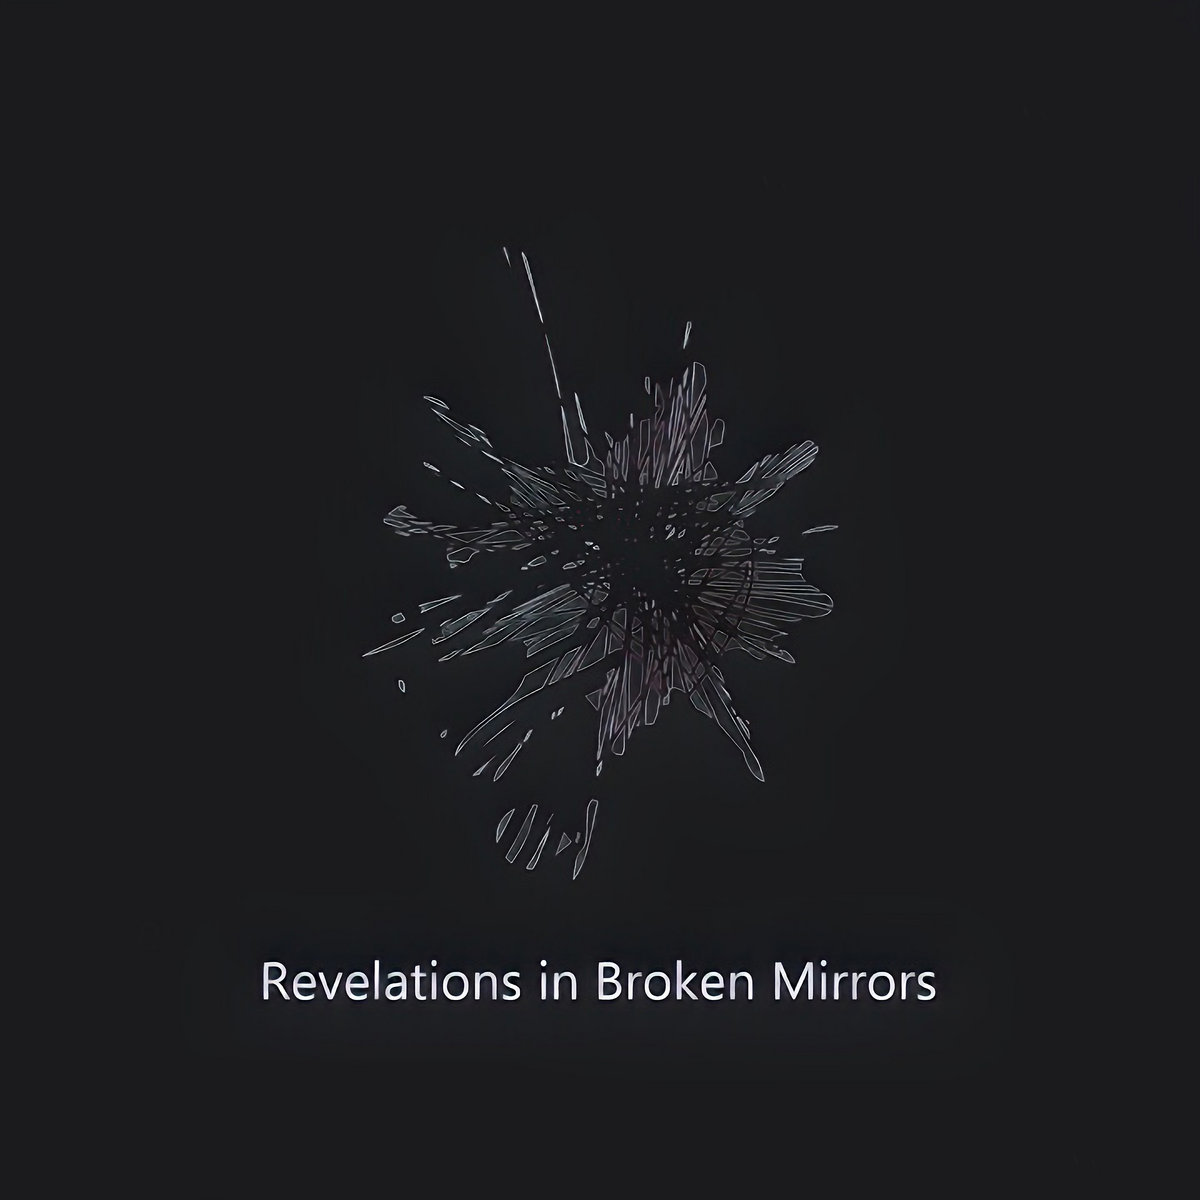 The cover image for Revelations in Broken Mirrors depicts a shattered mirror on a dark background.